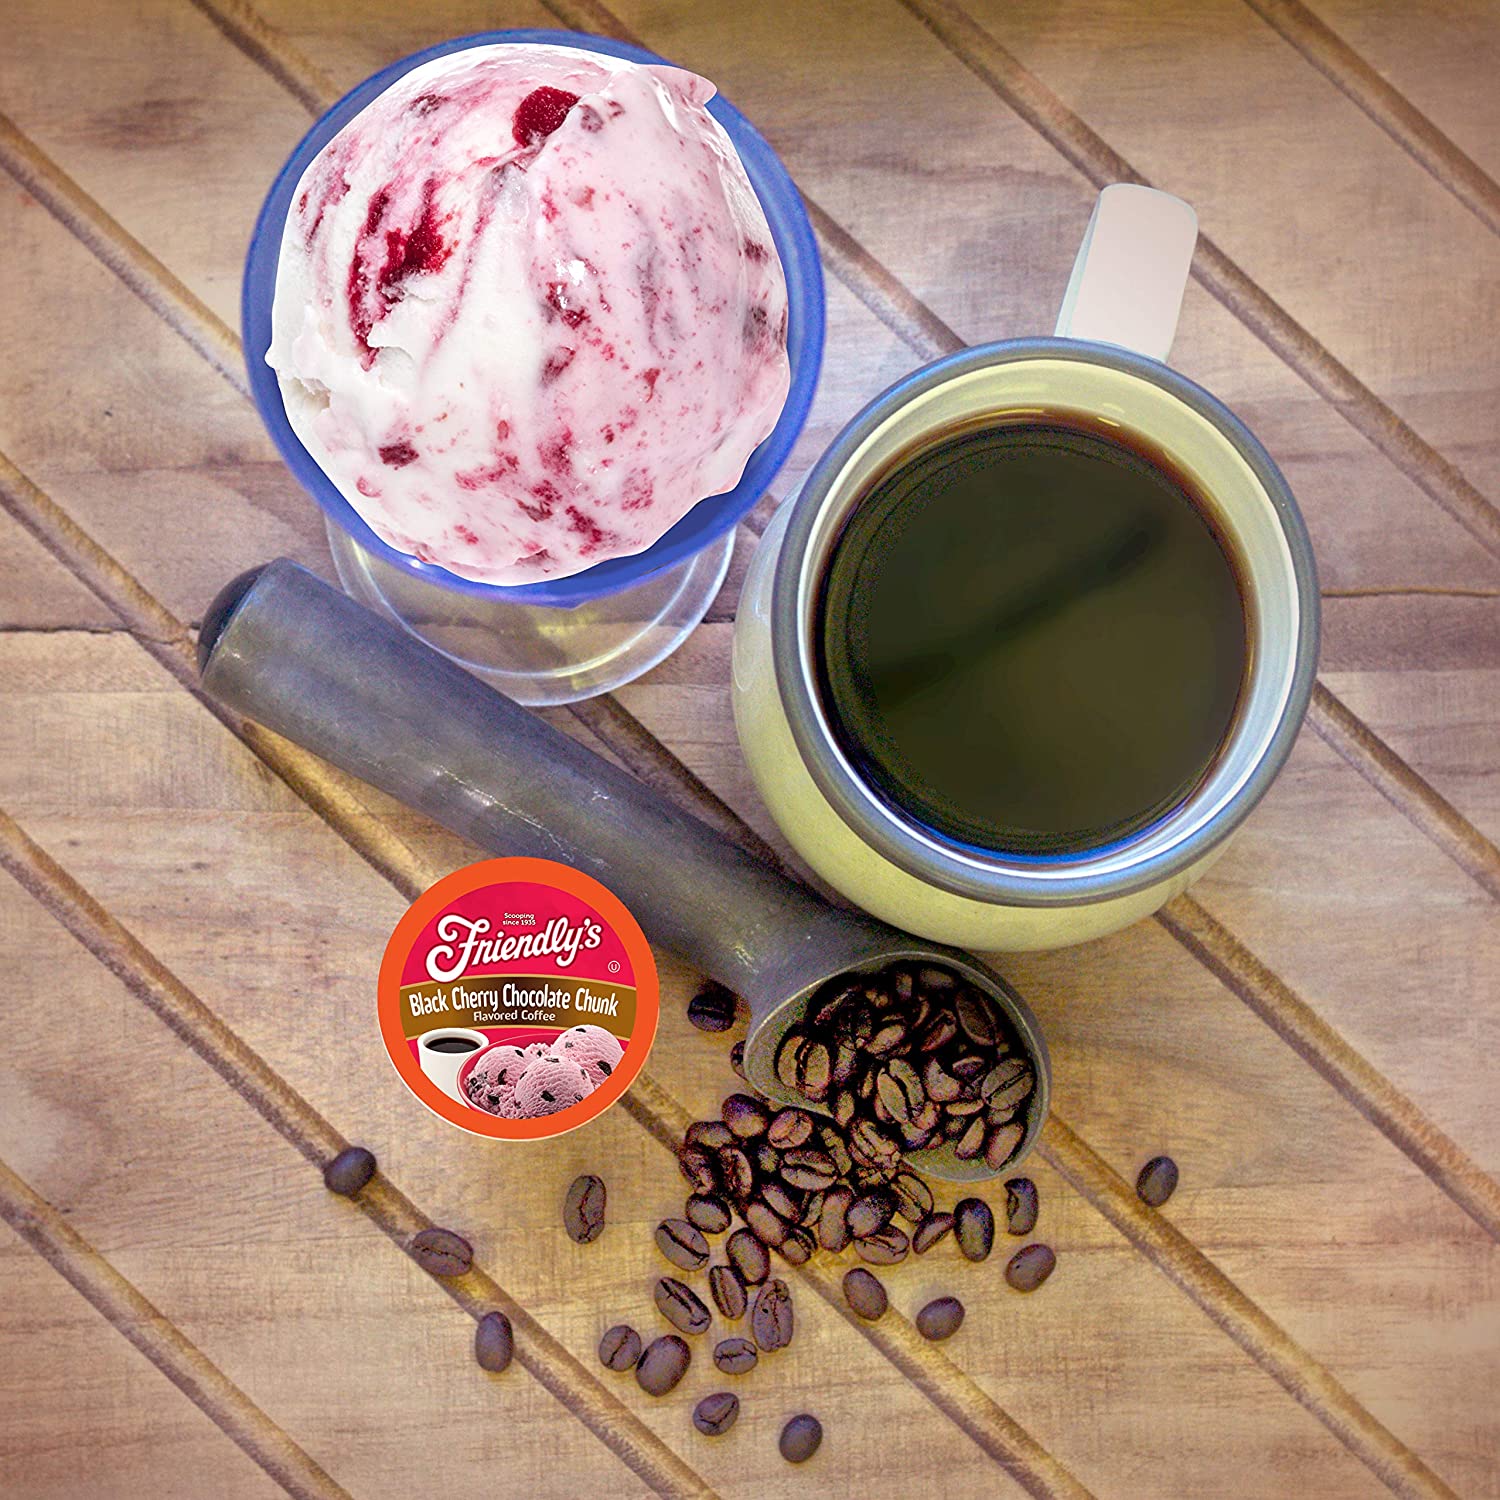 Friendly's Black Cherry Chocolate Chunk Ice Cream Flavored Coffee Giveaway